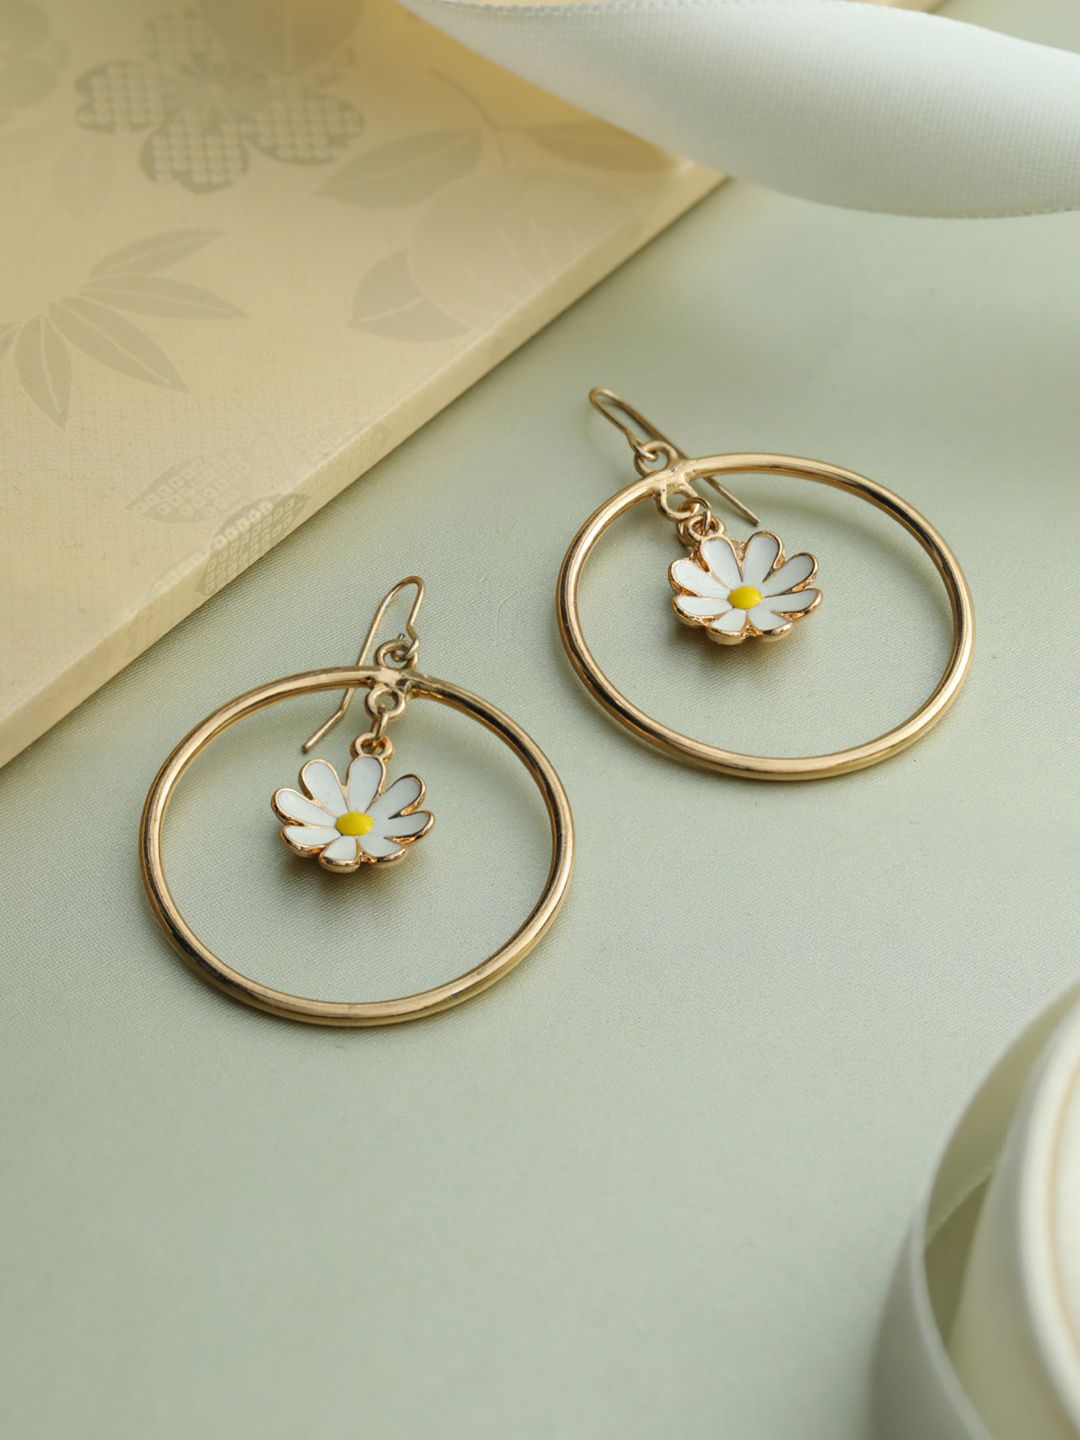 Priyaasi Gold-Toned Contemporary Drop Earrings Price in India